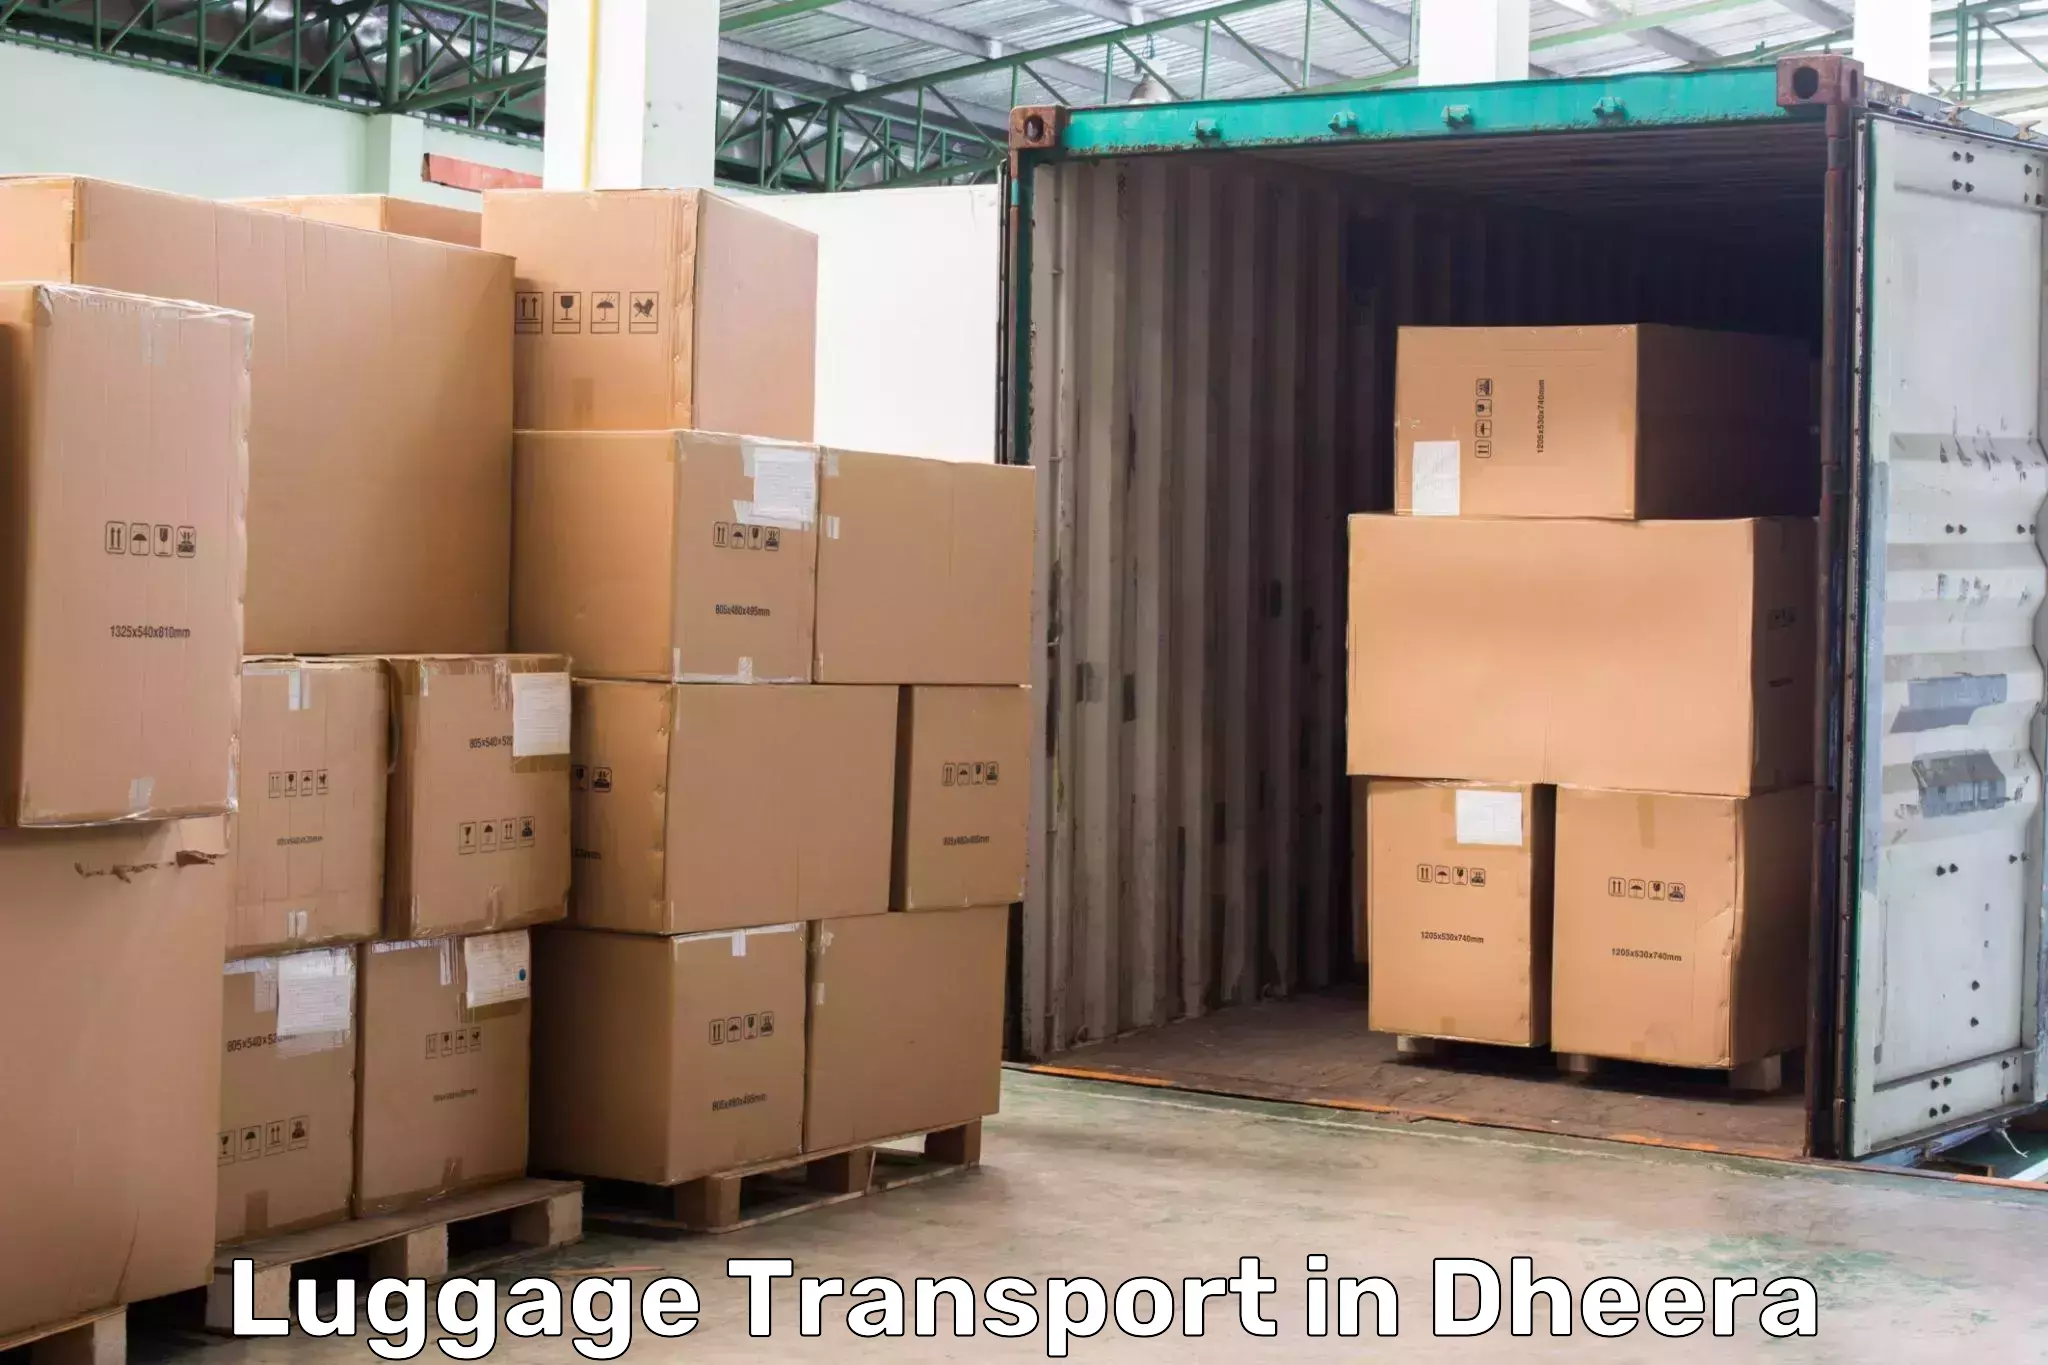 Luggage transport pricing in Dheera